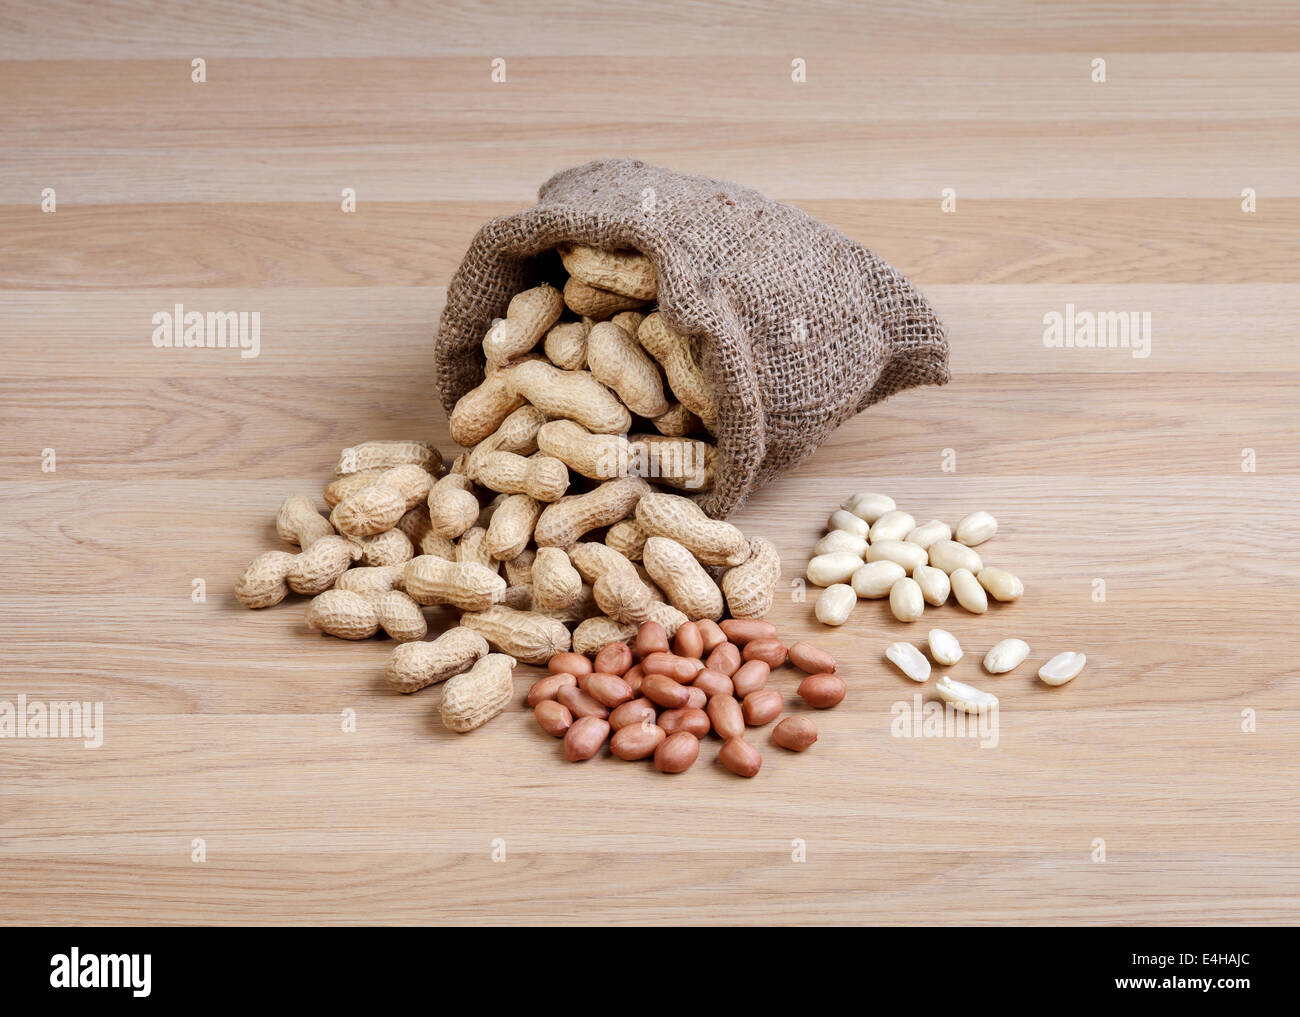 Peanuts in the bag sack isolated on wooden table Stock Photo